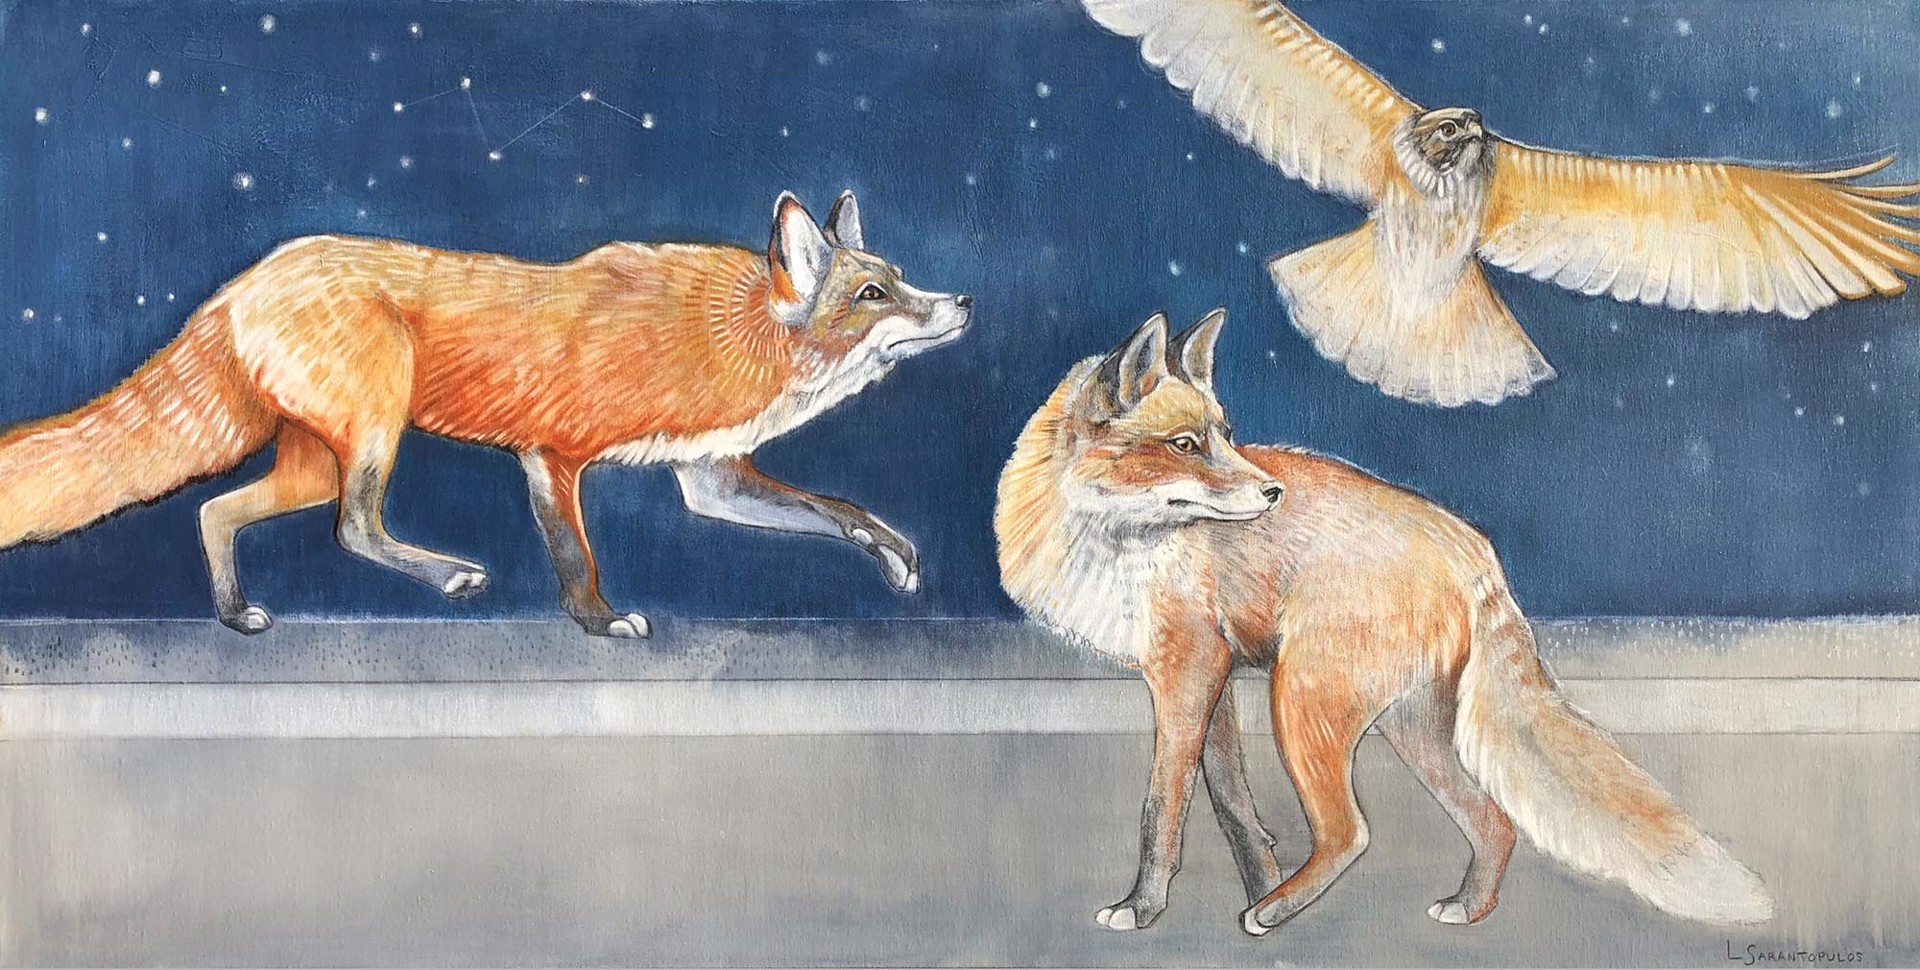 Original Mixed Media Painting Featuring Two Red Foxes And One Golden Hawk Over Abstracted Background In Gray And Blue With Constellation Detail